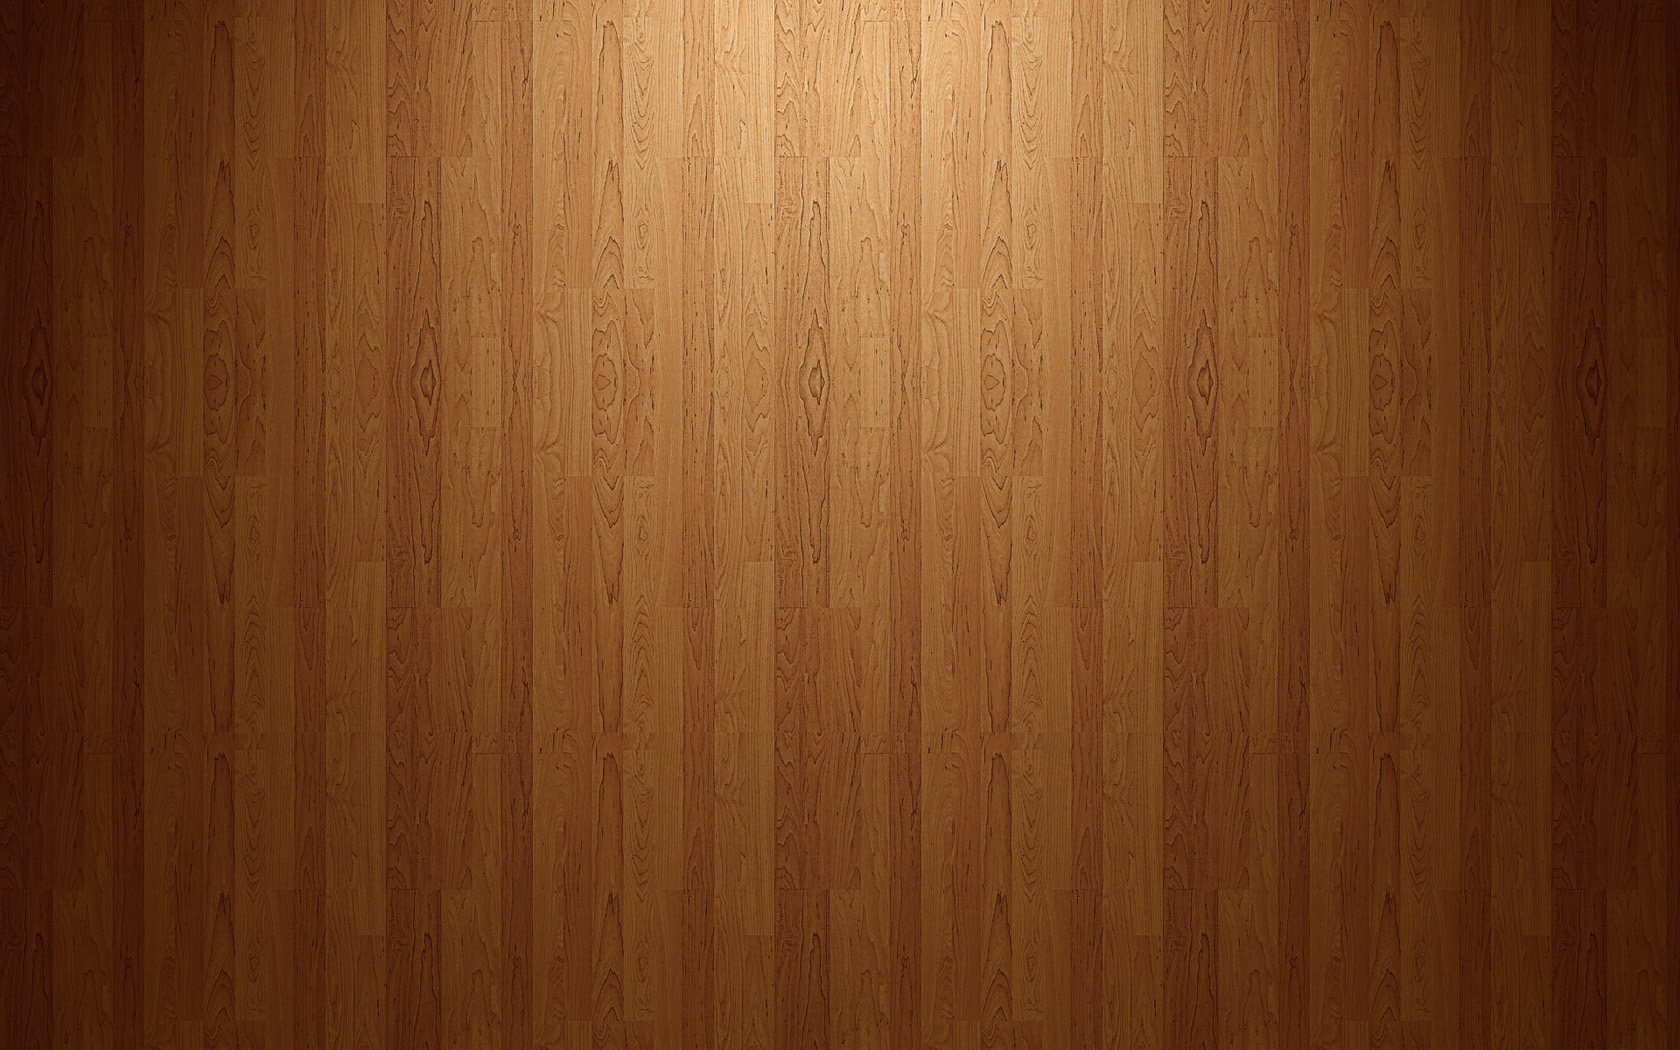 Wood Textures PPT Backgrounds